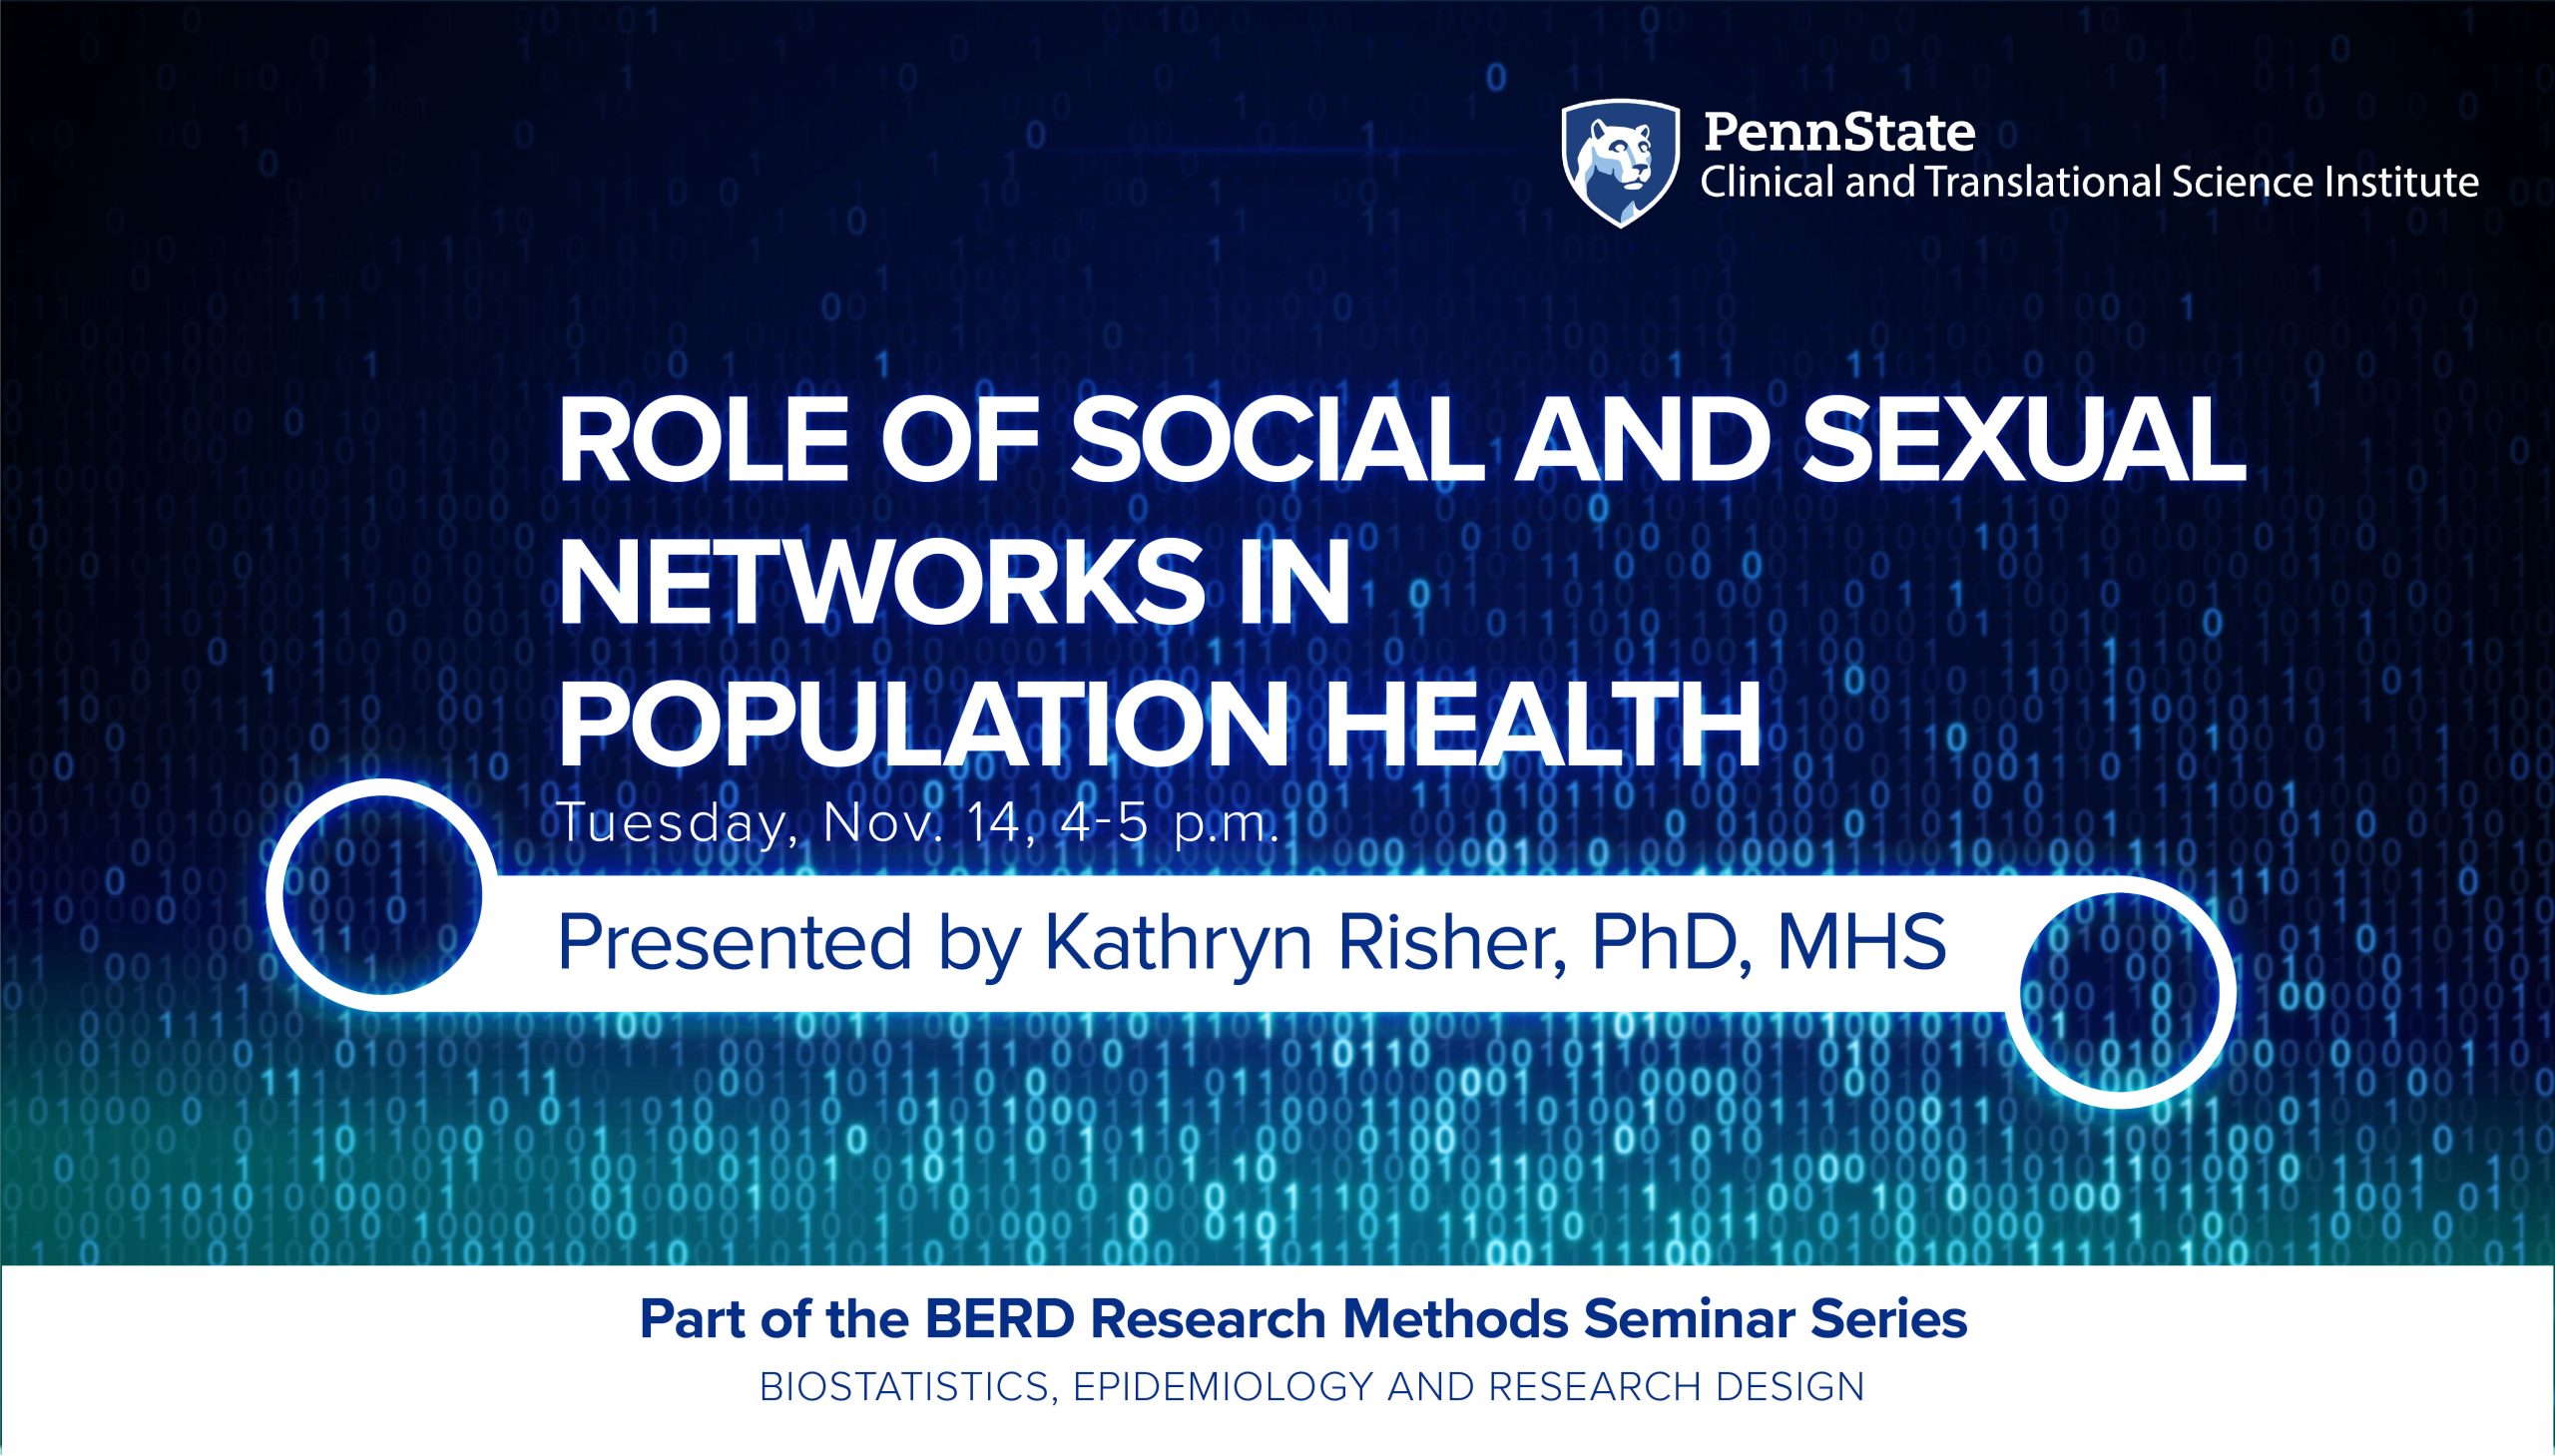 Role of Social and Sexual Networks in Population Health presented by Kathryn Risher, PhD, MHS